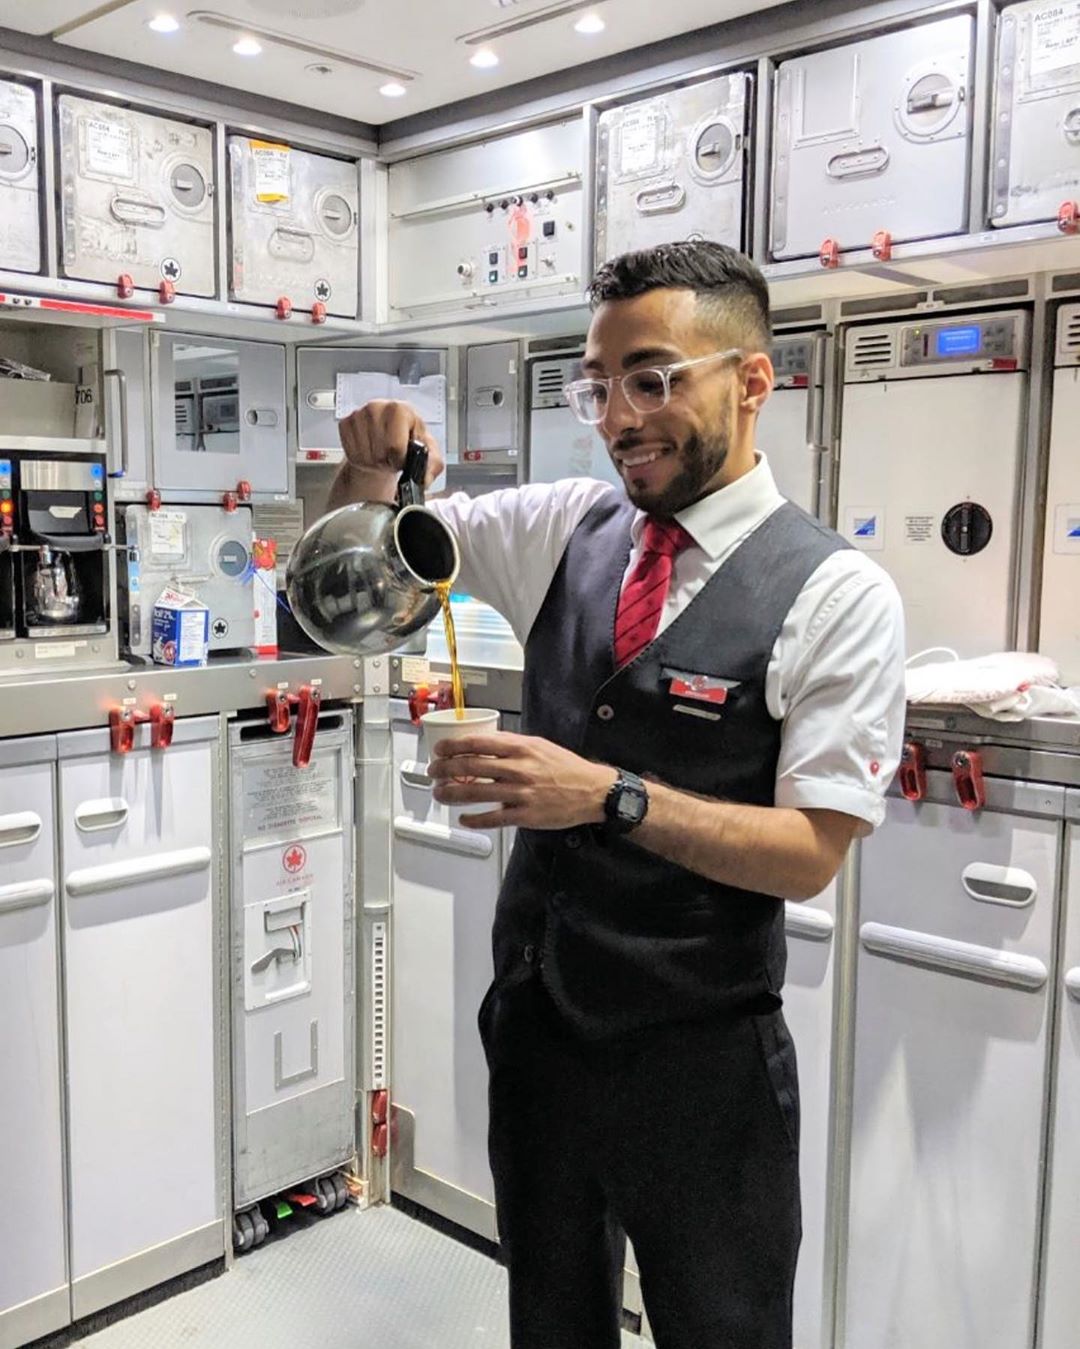 Male flight attendant with Air Canada pouring coffee. Photo by Instagram user @globetrotter95_